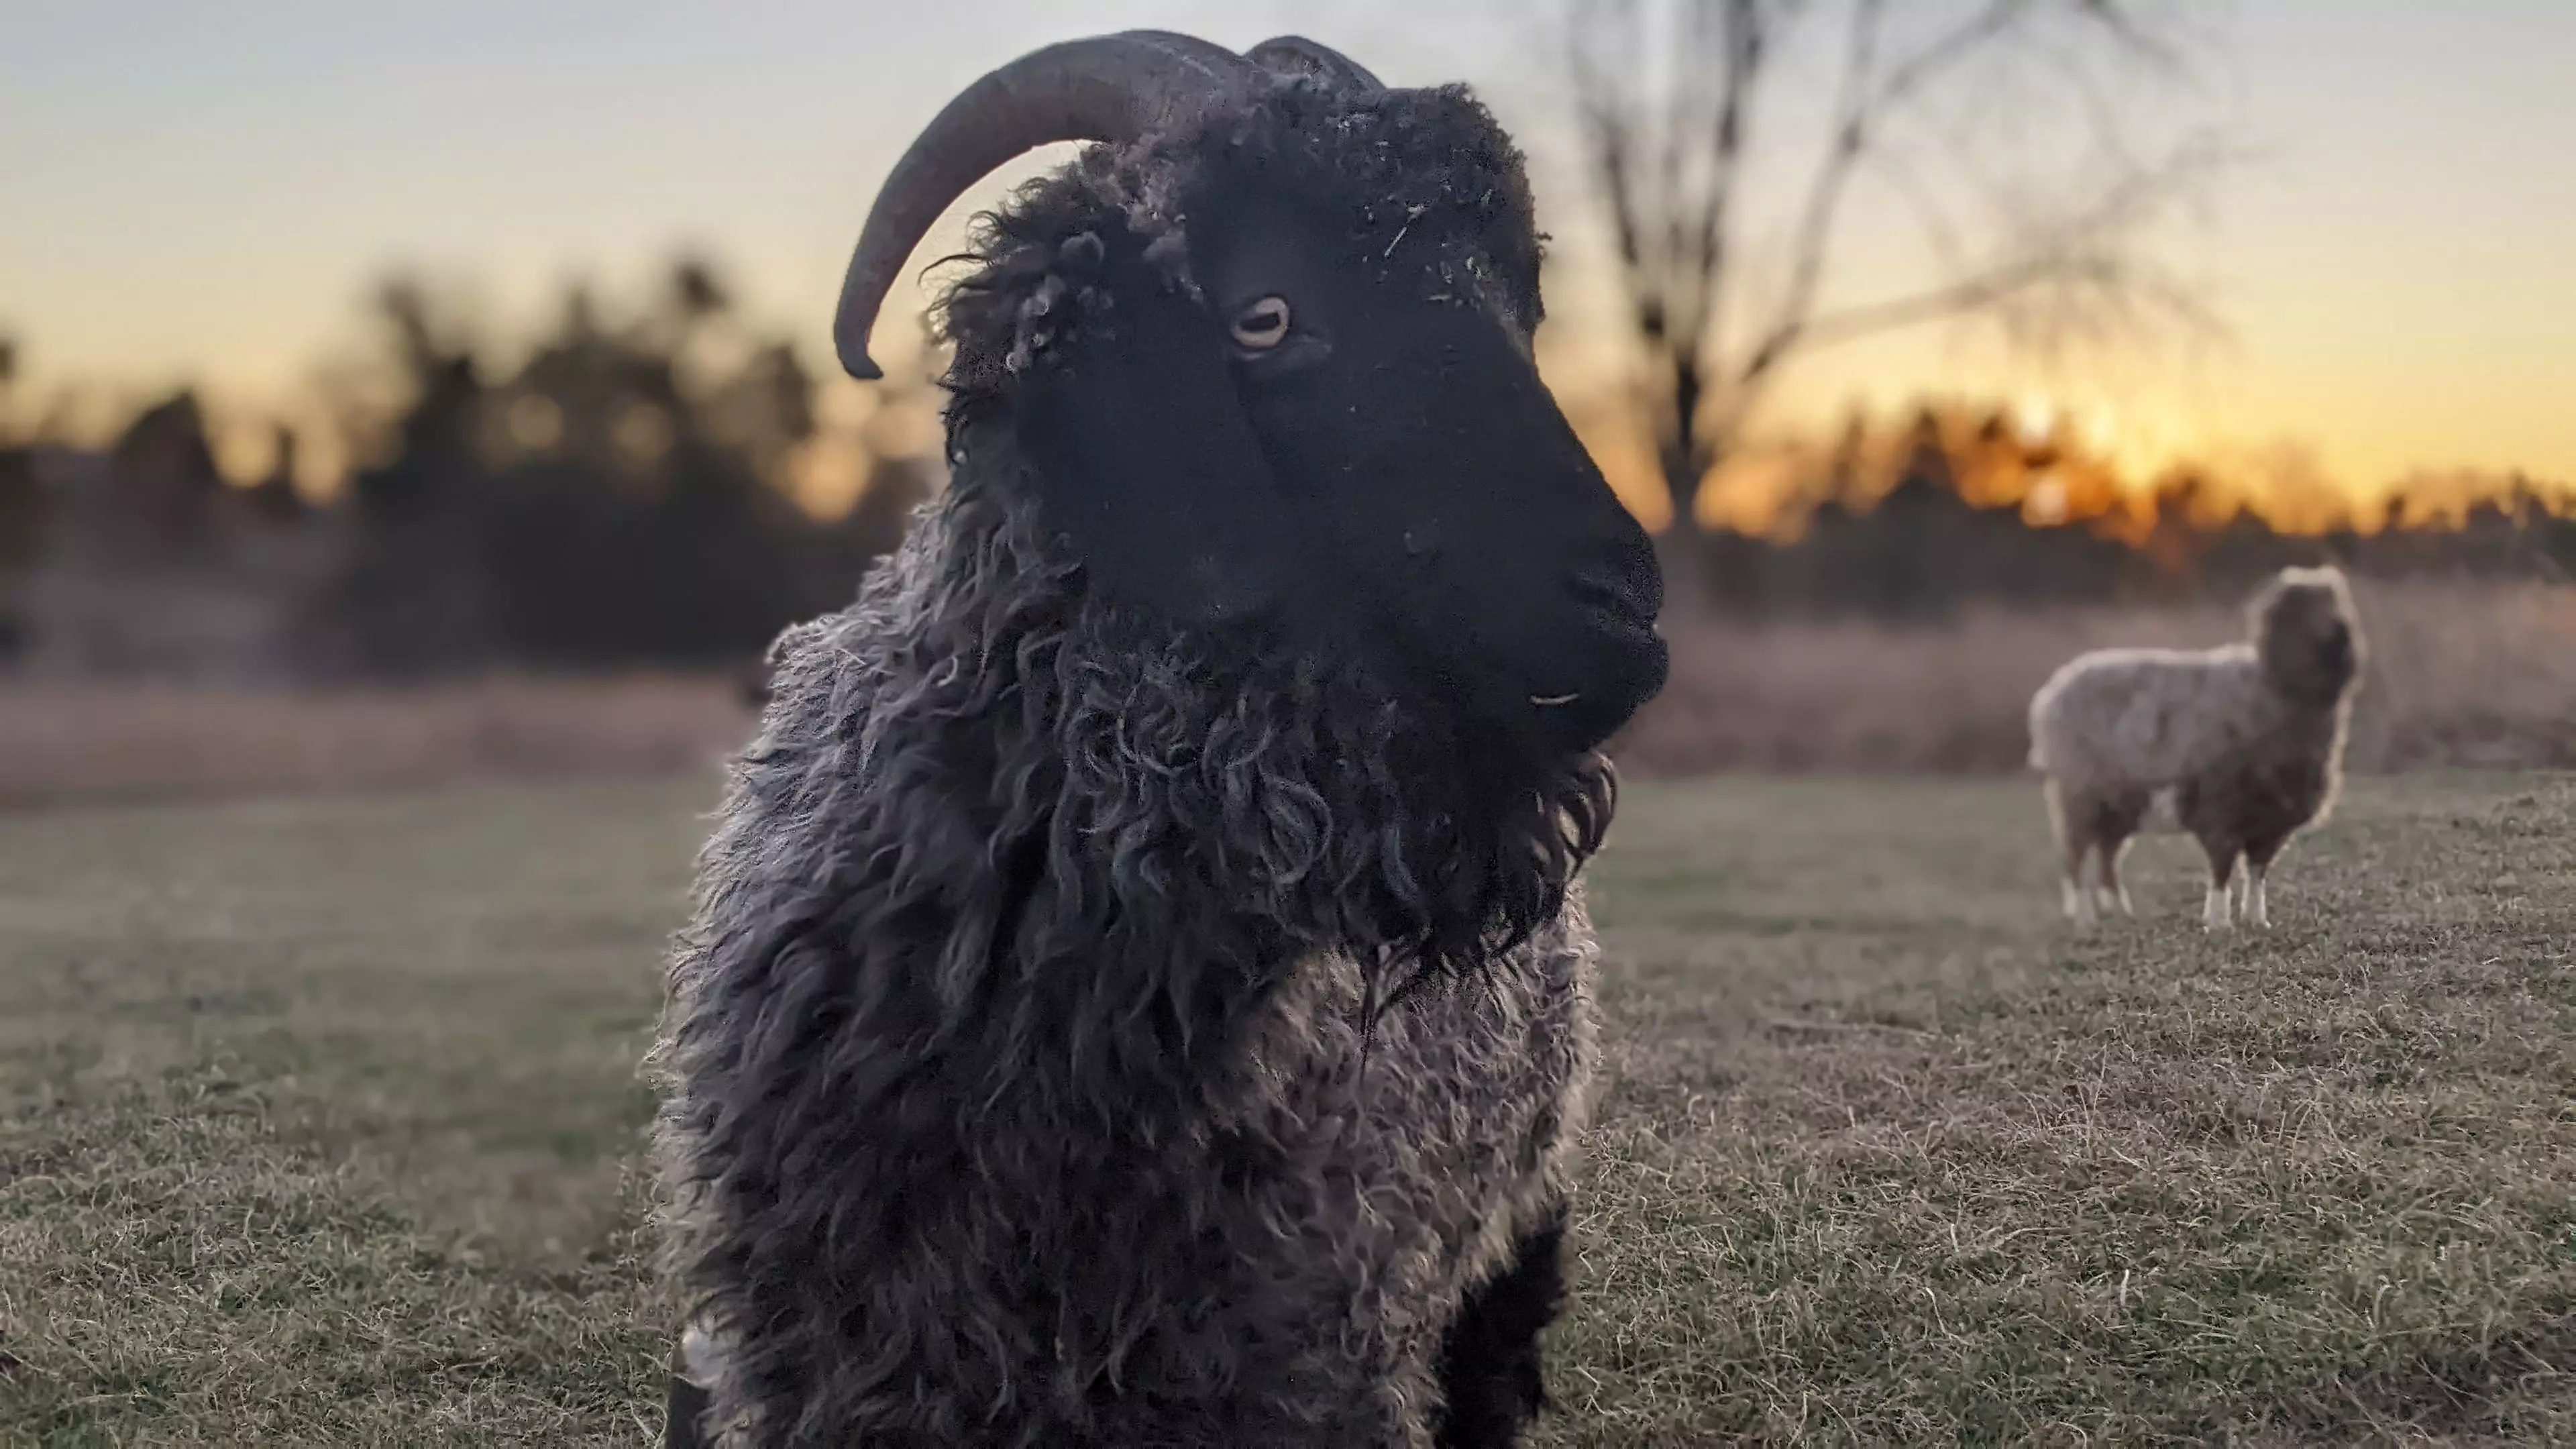 A portrait image of a goat named Freddie